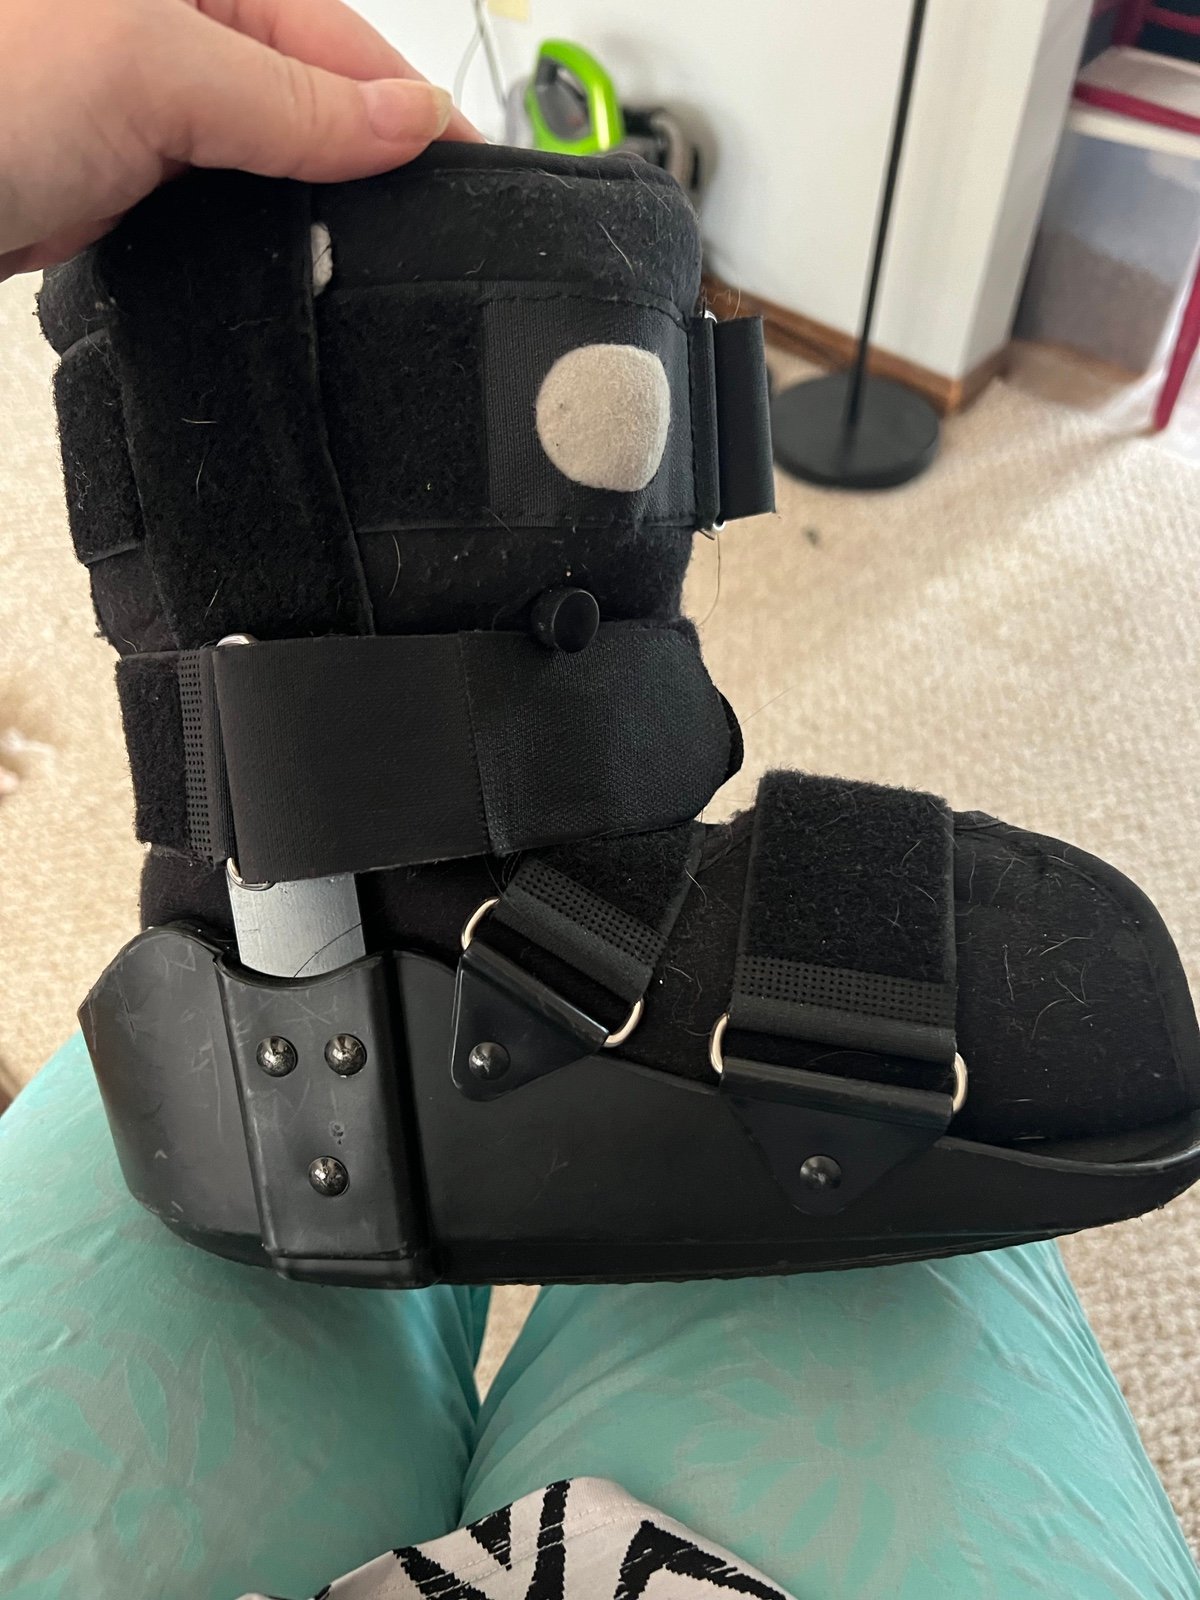 Boot for ankle sprain CbRQAyHNt